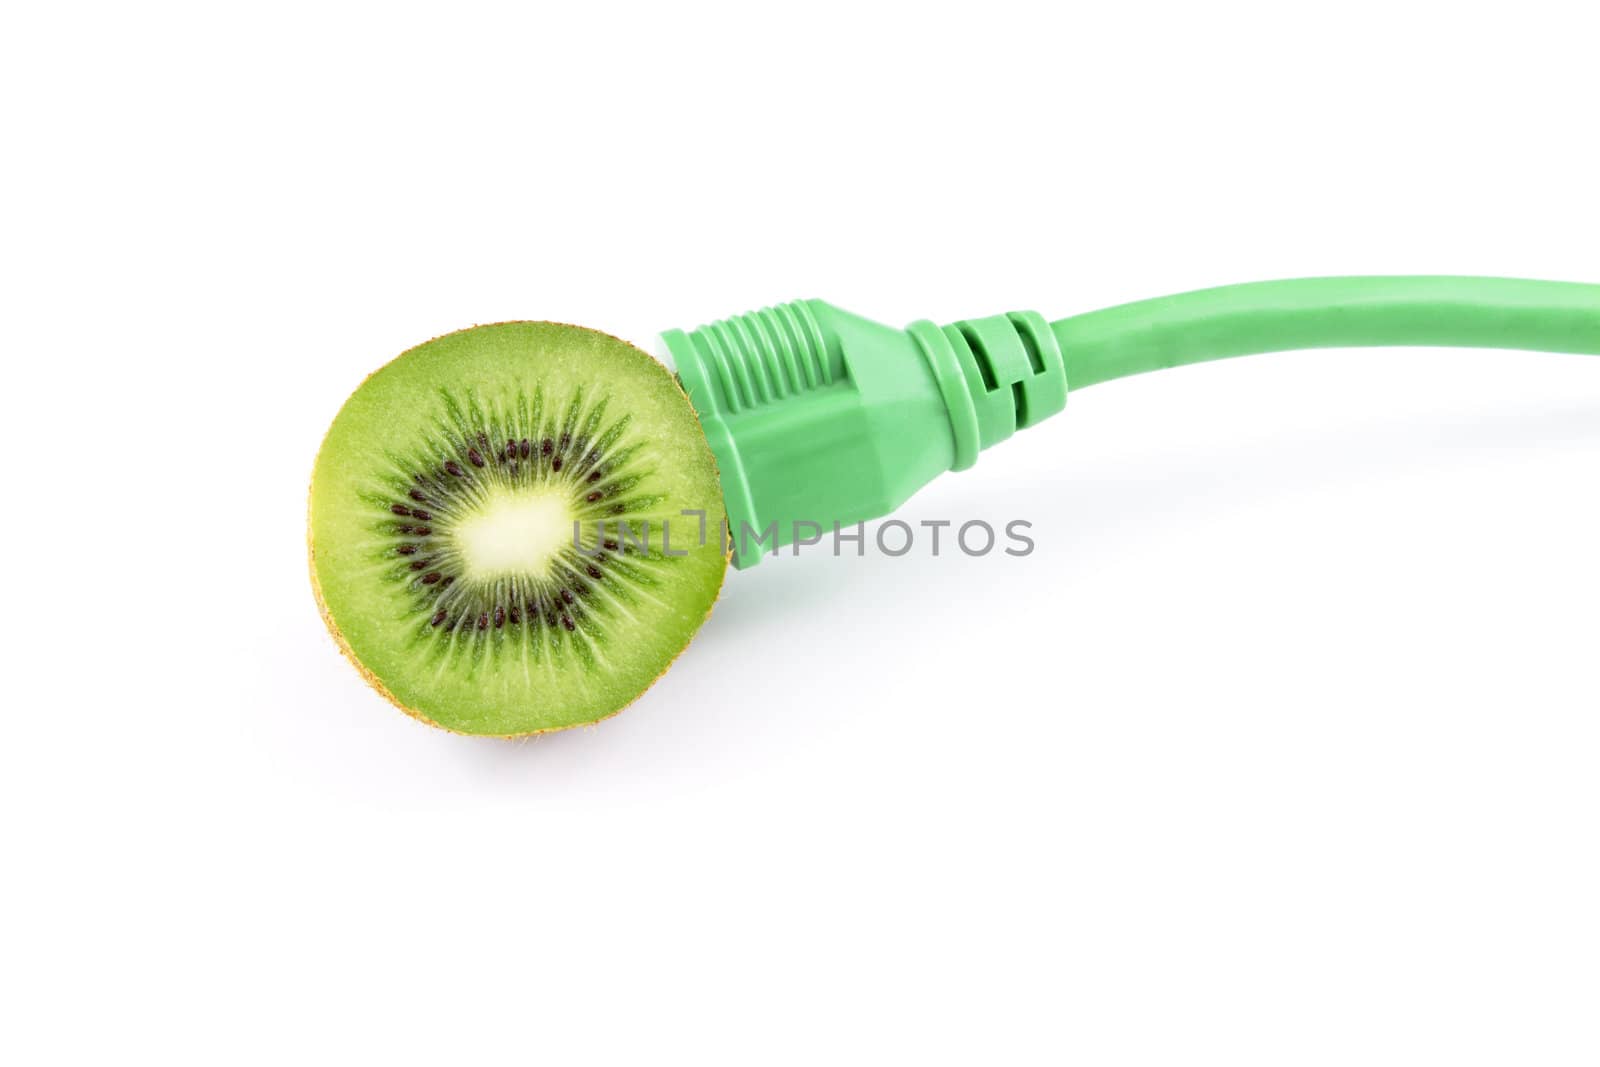 Electric plug is inserted into kiwi in metaphor of innovation working toward natural, green energy